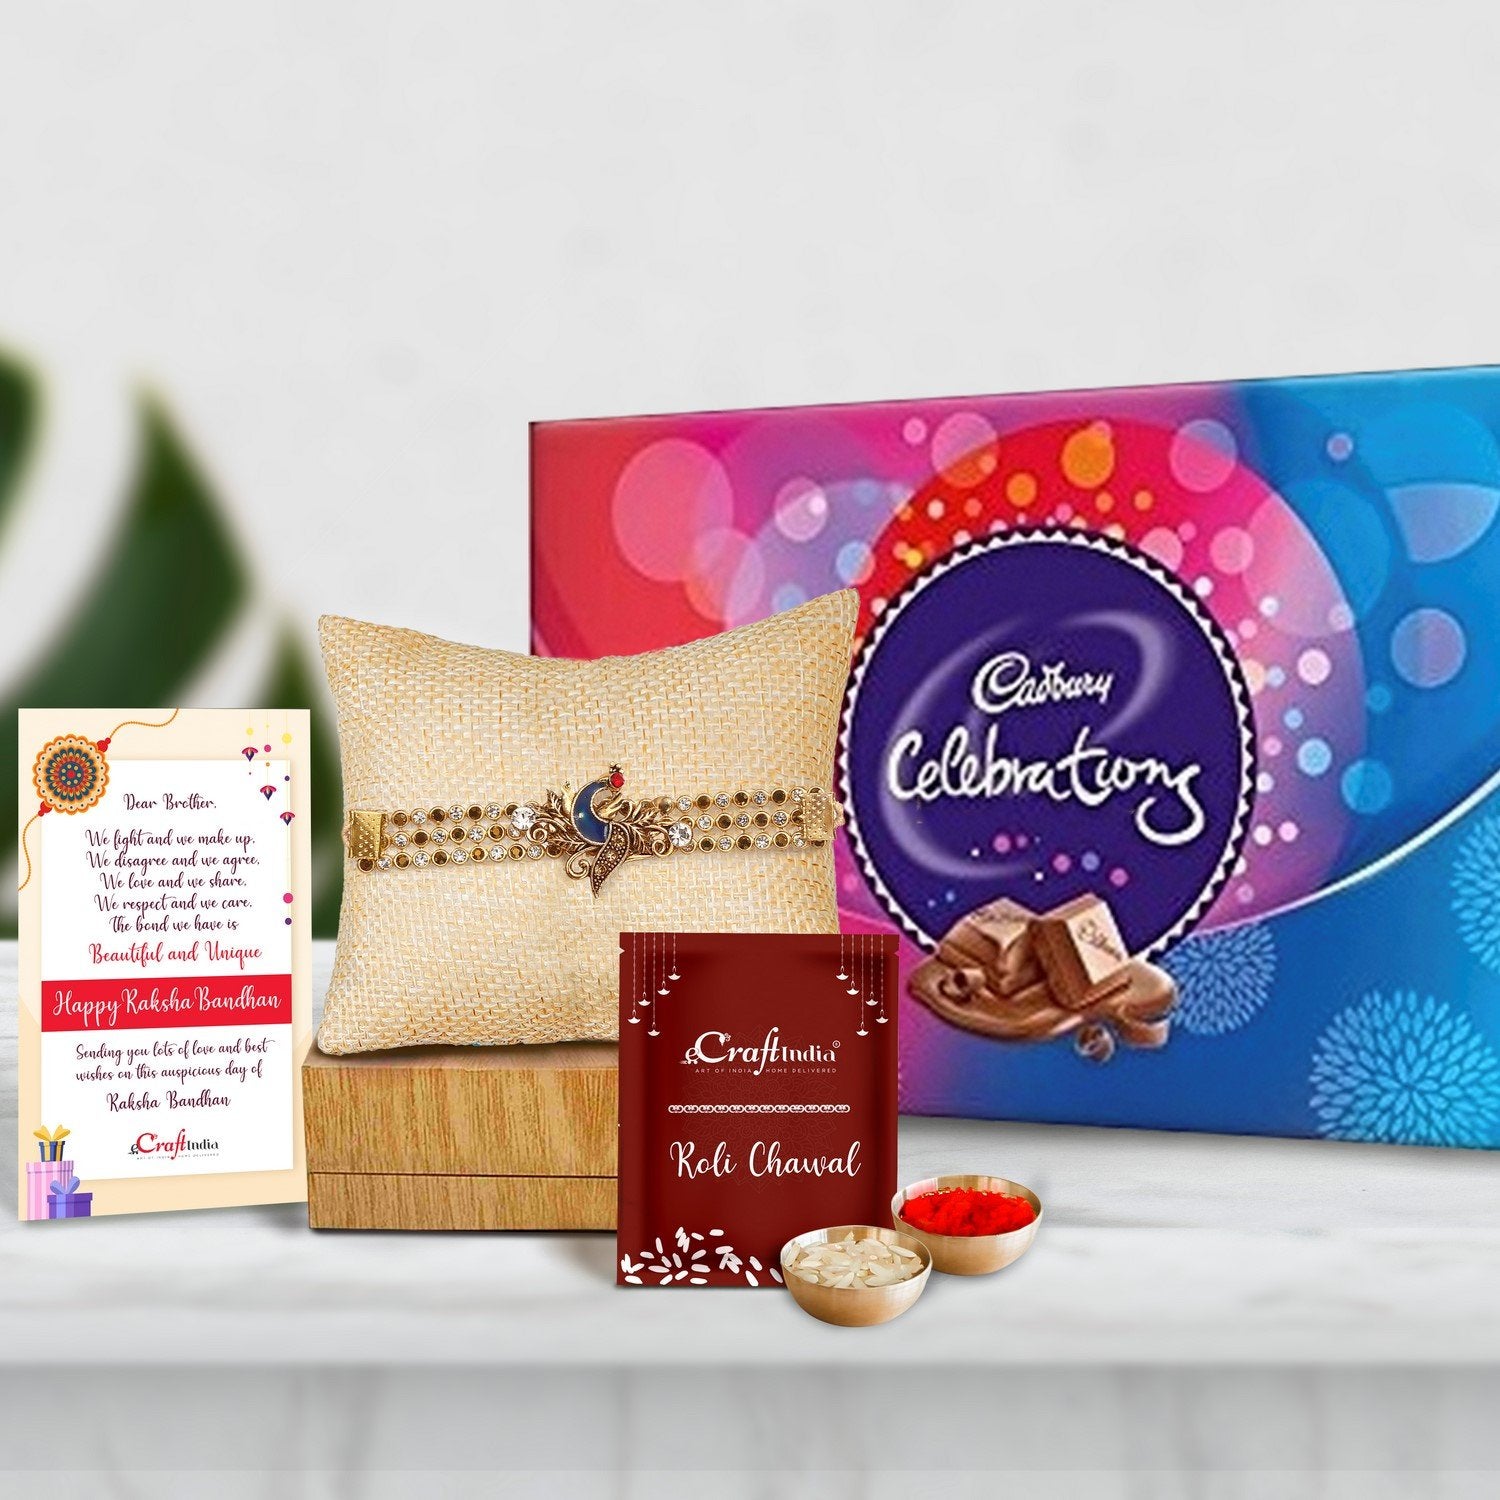 Designer Peacock Rakhi with Cadbury Celebrations Gift Pack of 7 Assorted Chocolates and Roli Chawal Pack, Best Wishes Greeting Card